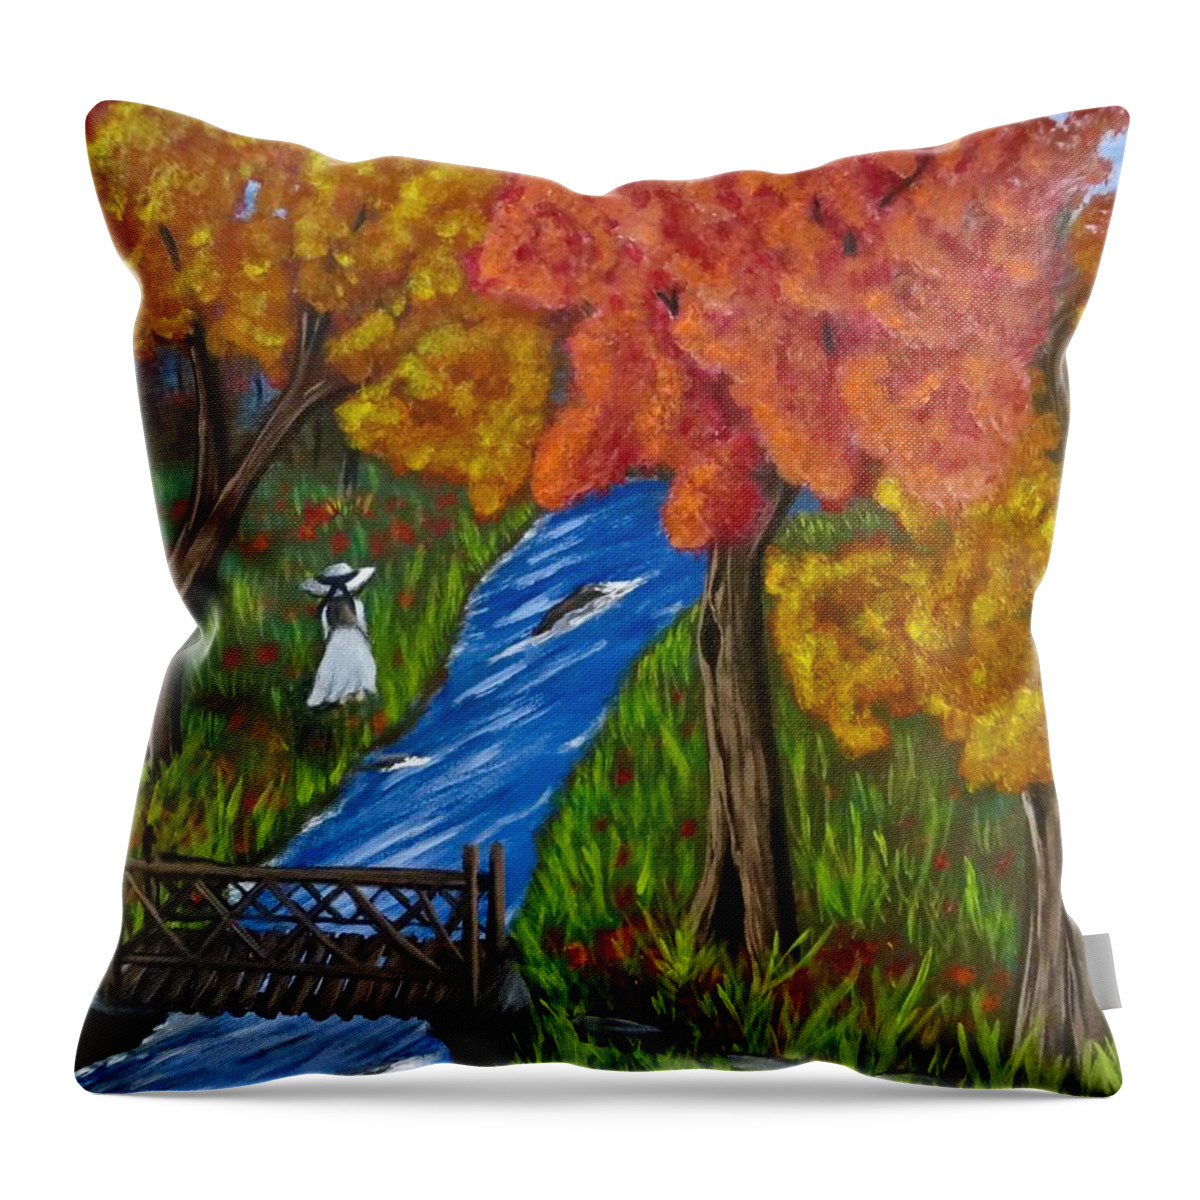 Landscape Throw Pillow featuring the painting Autumn Stroll by Teresa Wing